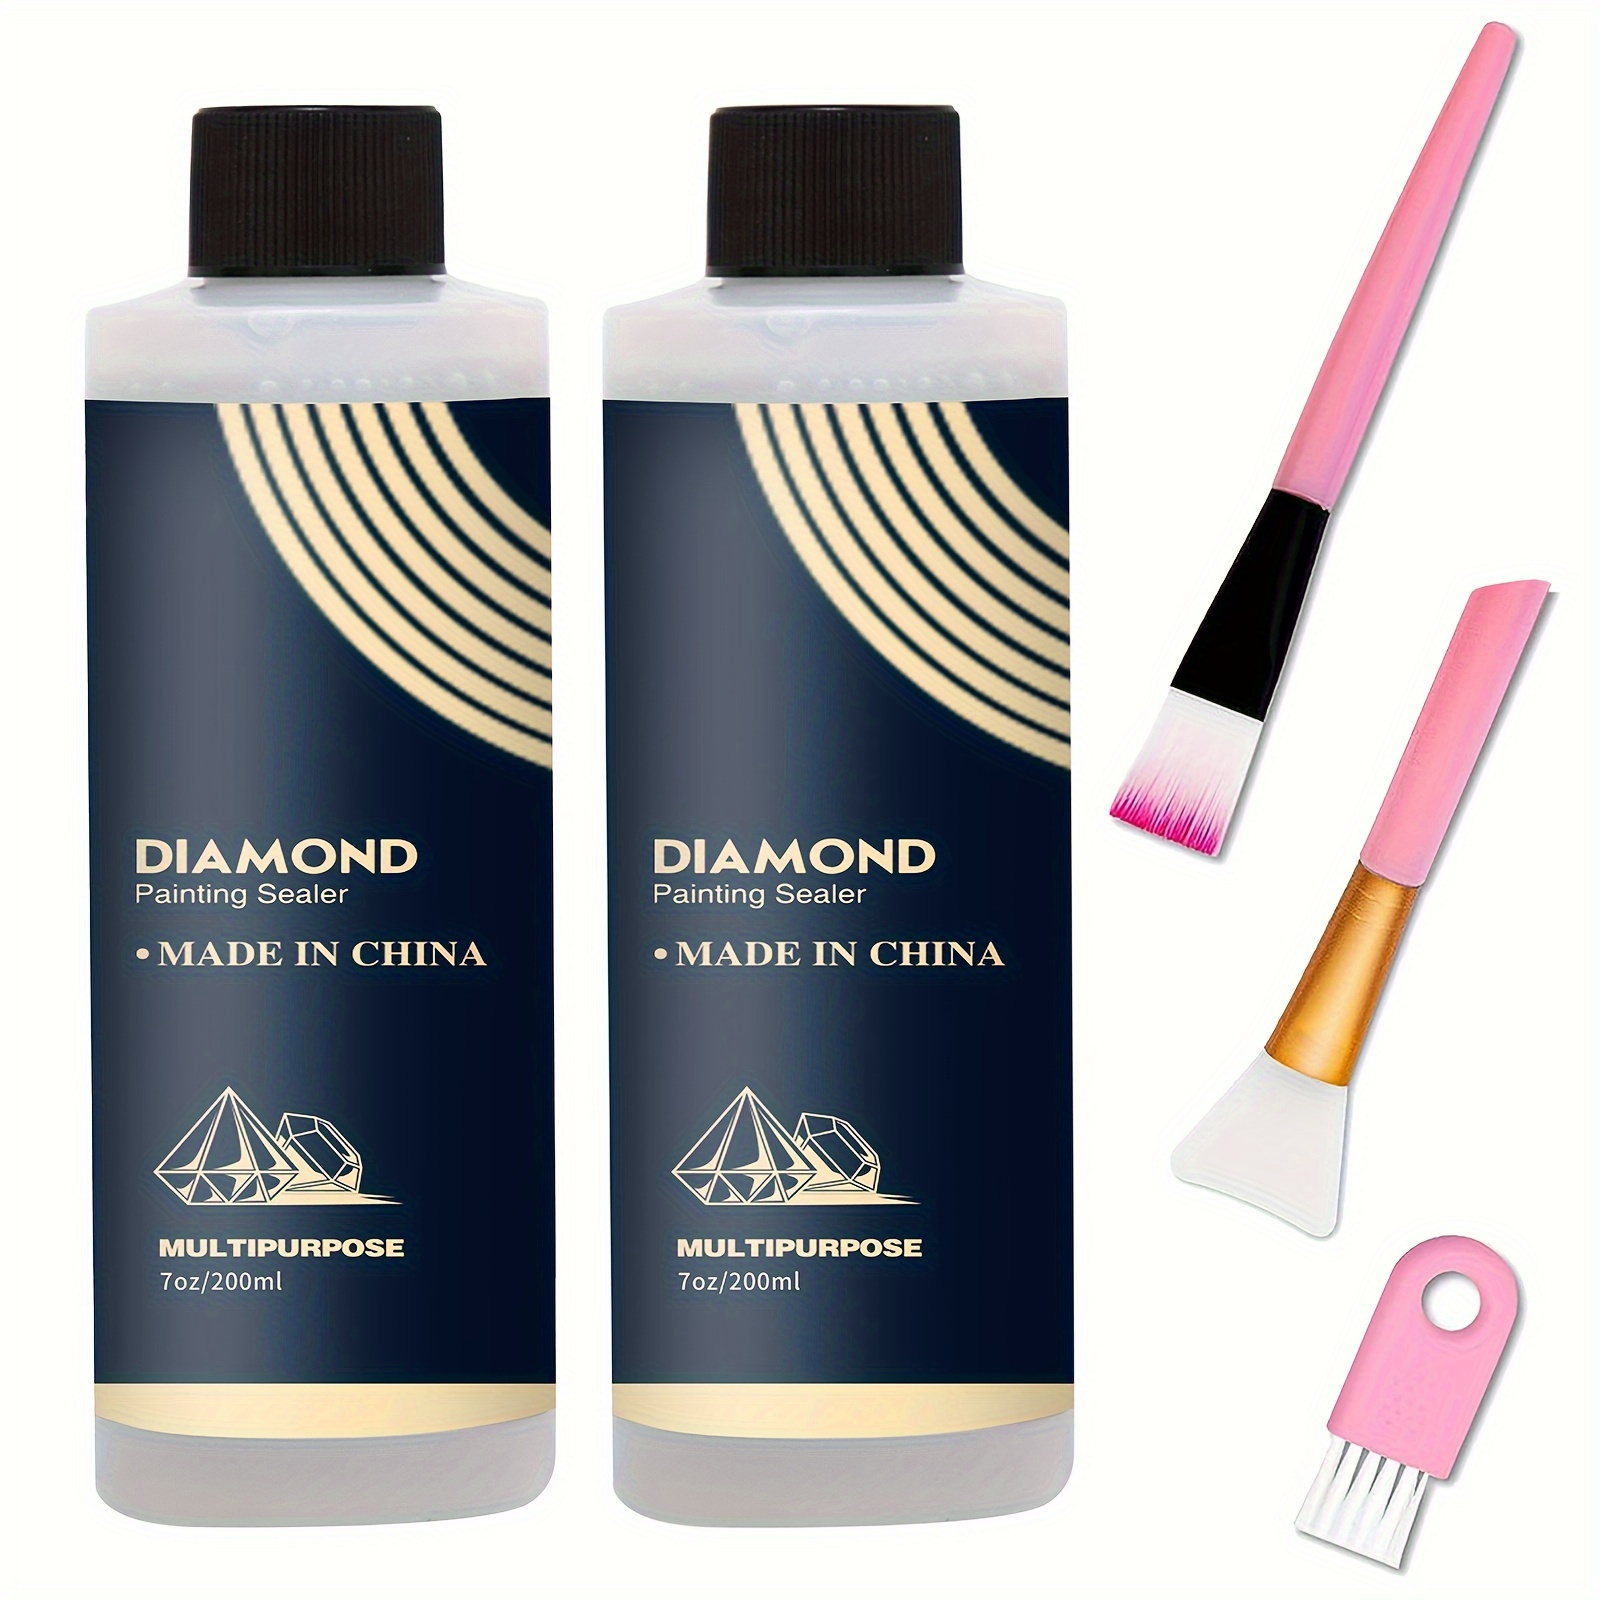 Updated Diamond Painting Sealer 250ML with Silicone Brush, 5D